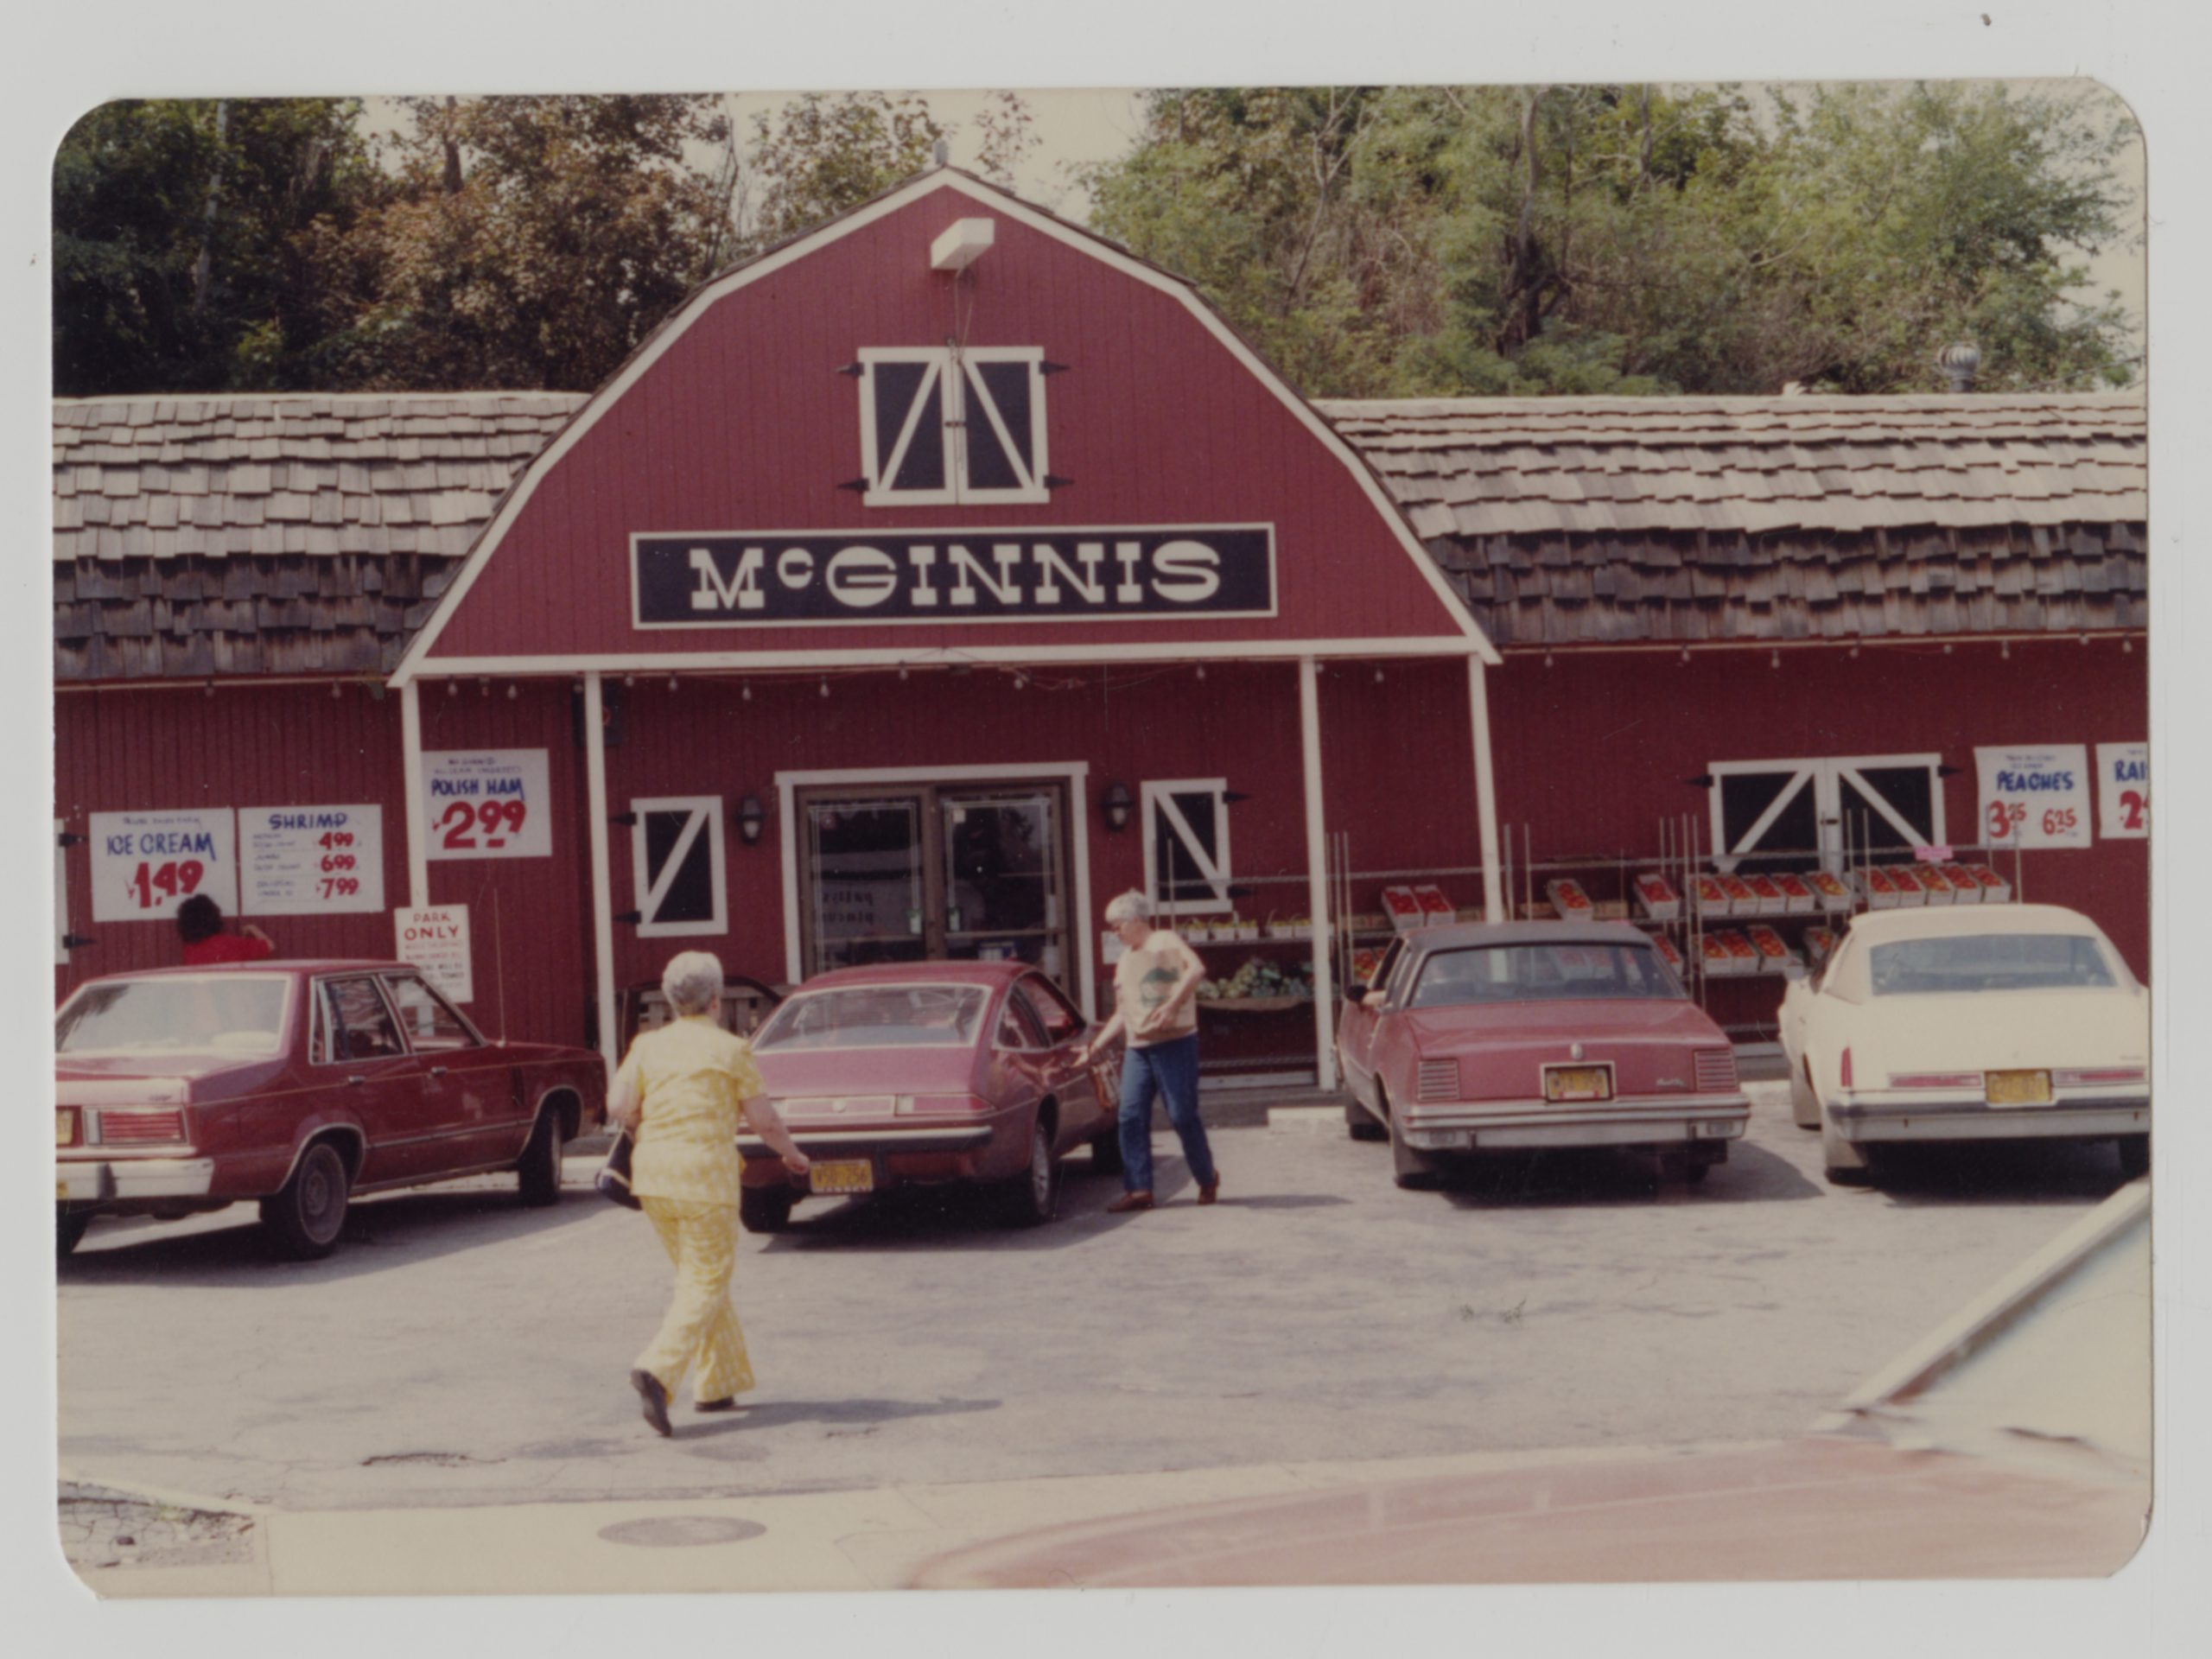 A view of the McGinnis Country Deli and Market store on Brownsville Road in the South Hills, c. 1980.